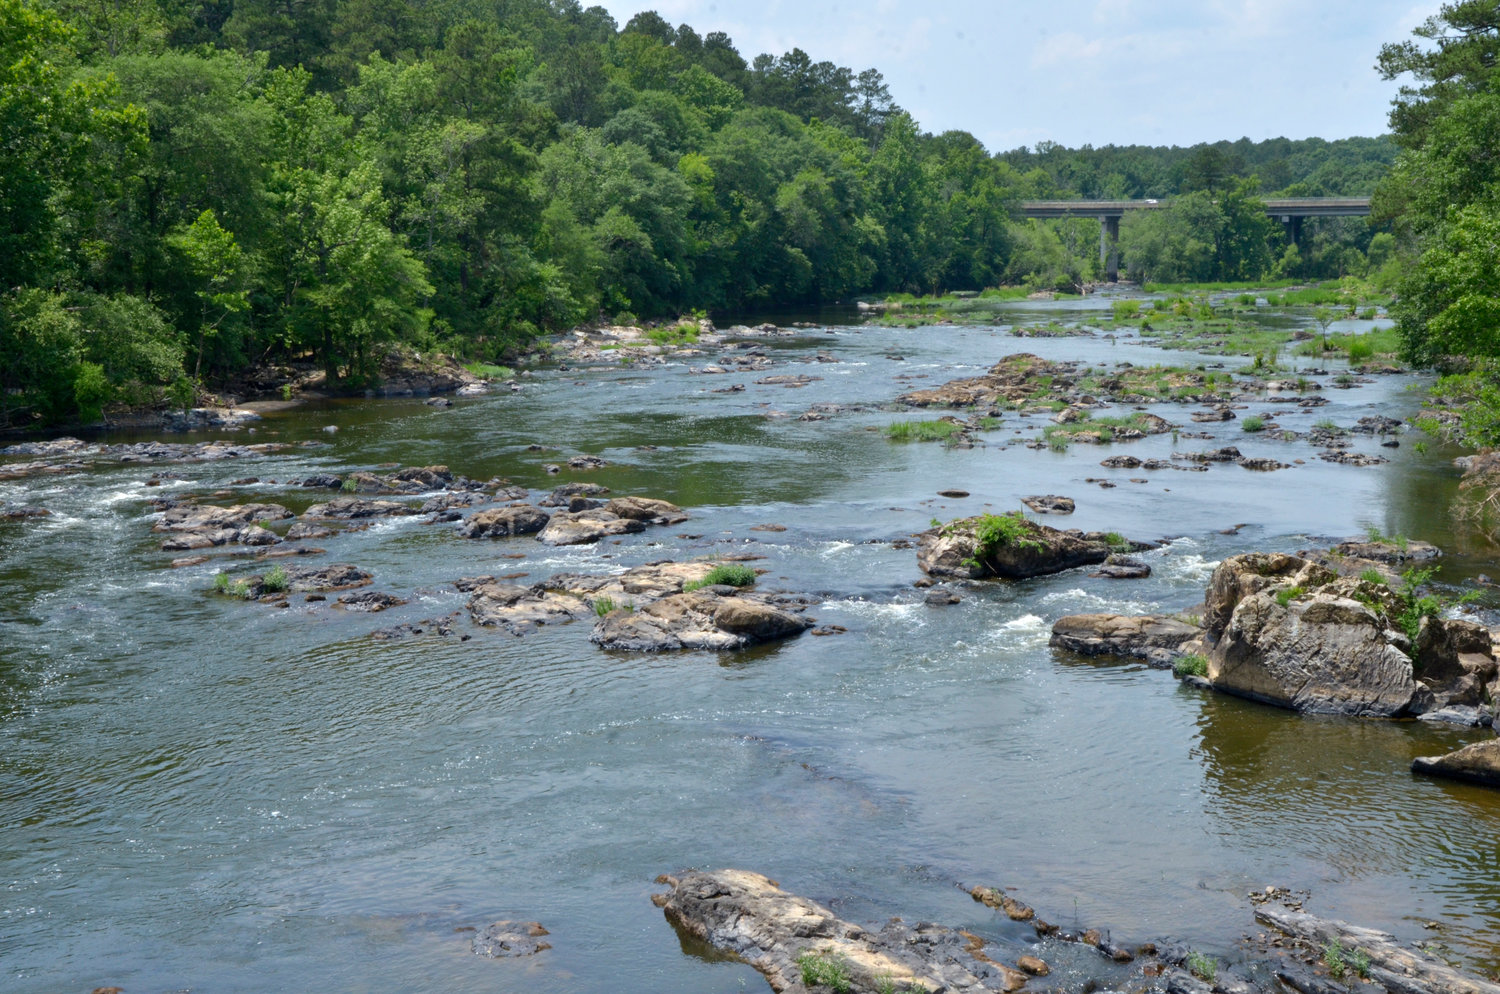 A study of more than 100 drinking water samples from around the country found the nation's highest PFAS concentration in Pittsboro. Pictured here is the Haw River, which flows through Pittsboro and supplies the town with its drinking water, and is 'one of the most impacted' waterways in terms of unregulated chemicals in the Cape Fear Basin, according to Detlef Knappe, S. James Ellen Distinguished Professor of Civil, Construction and Environmental Engineering at N.C. State.